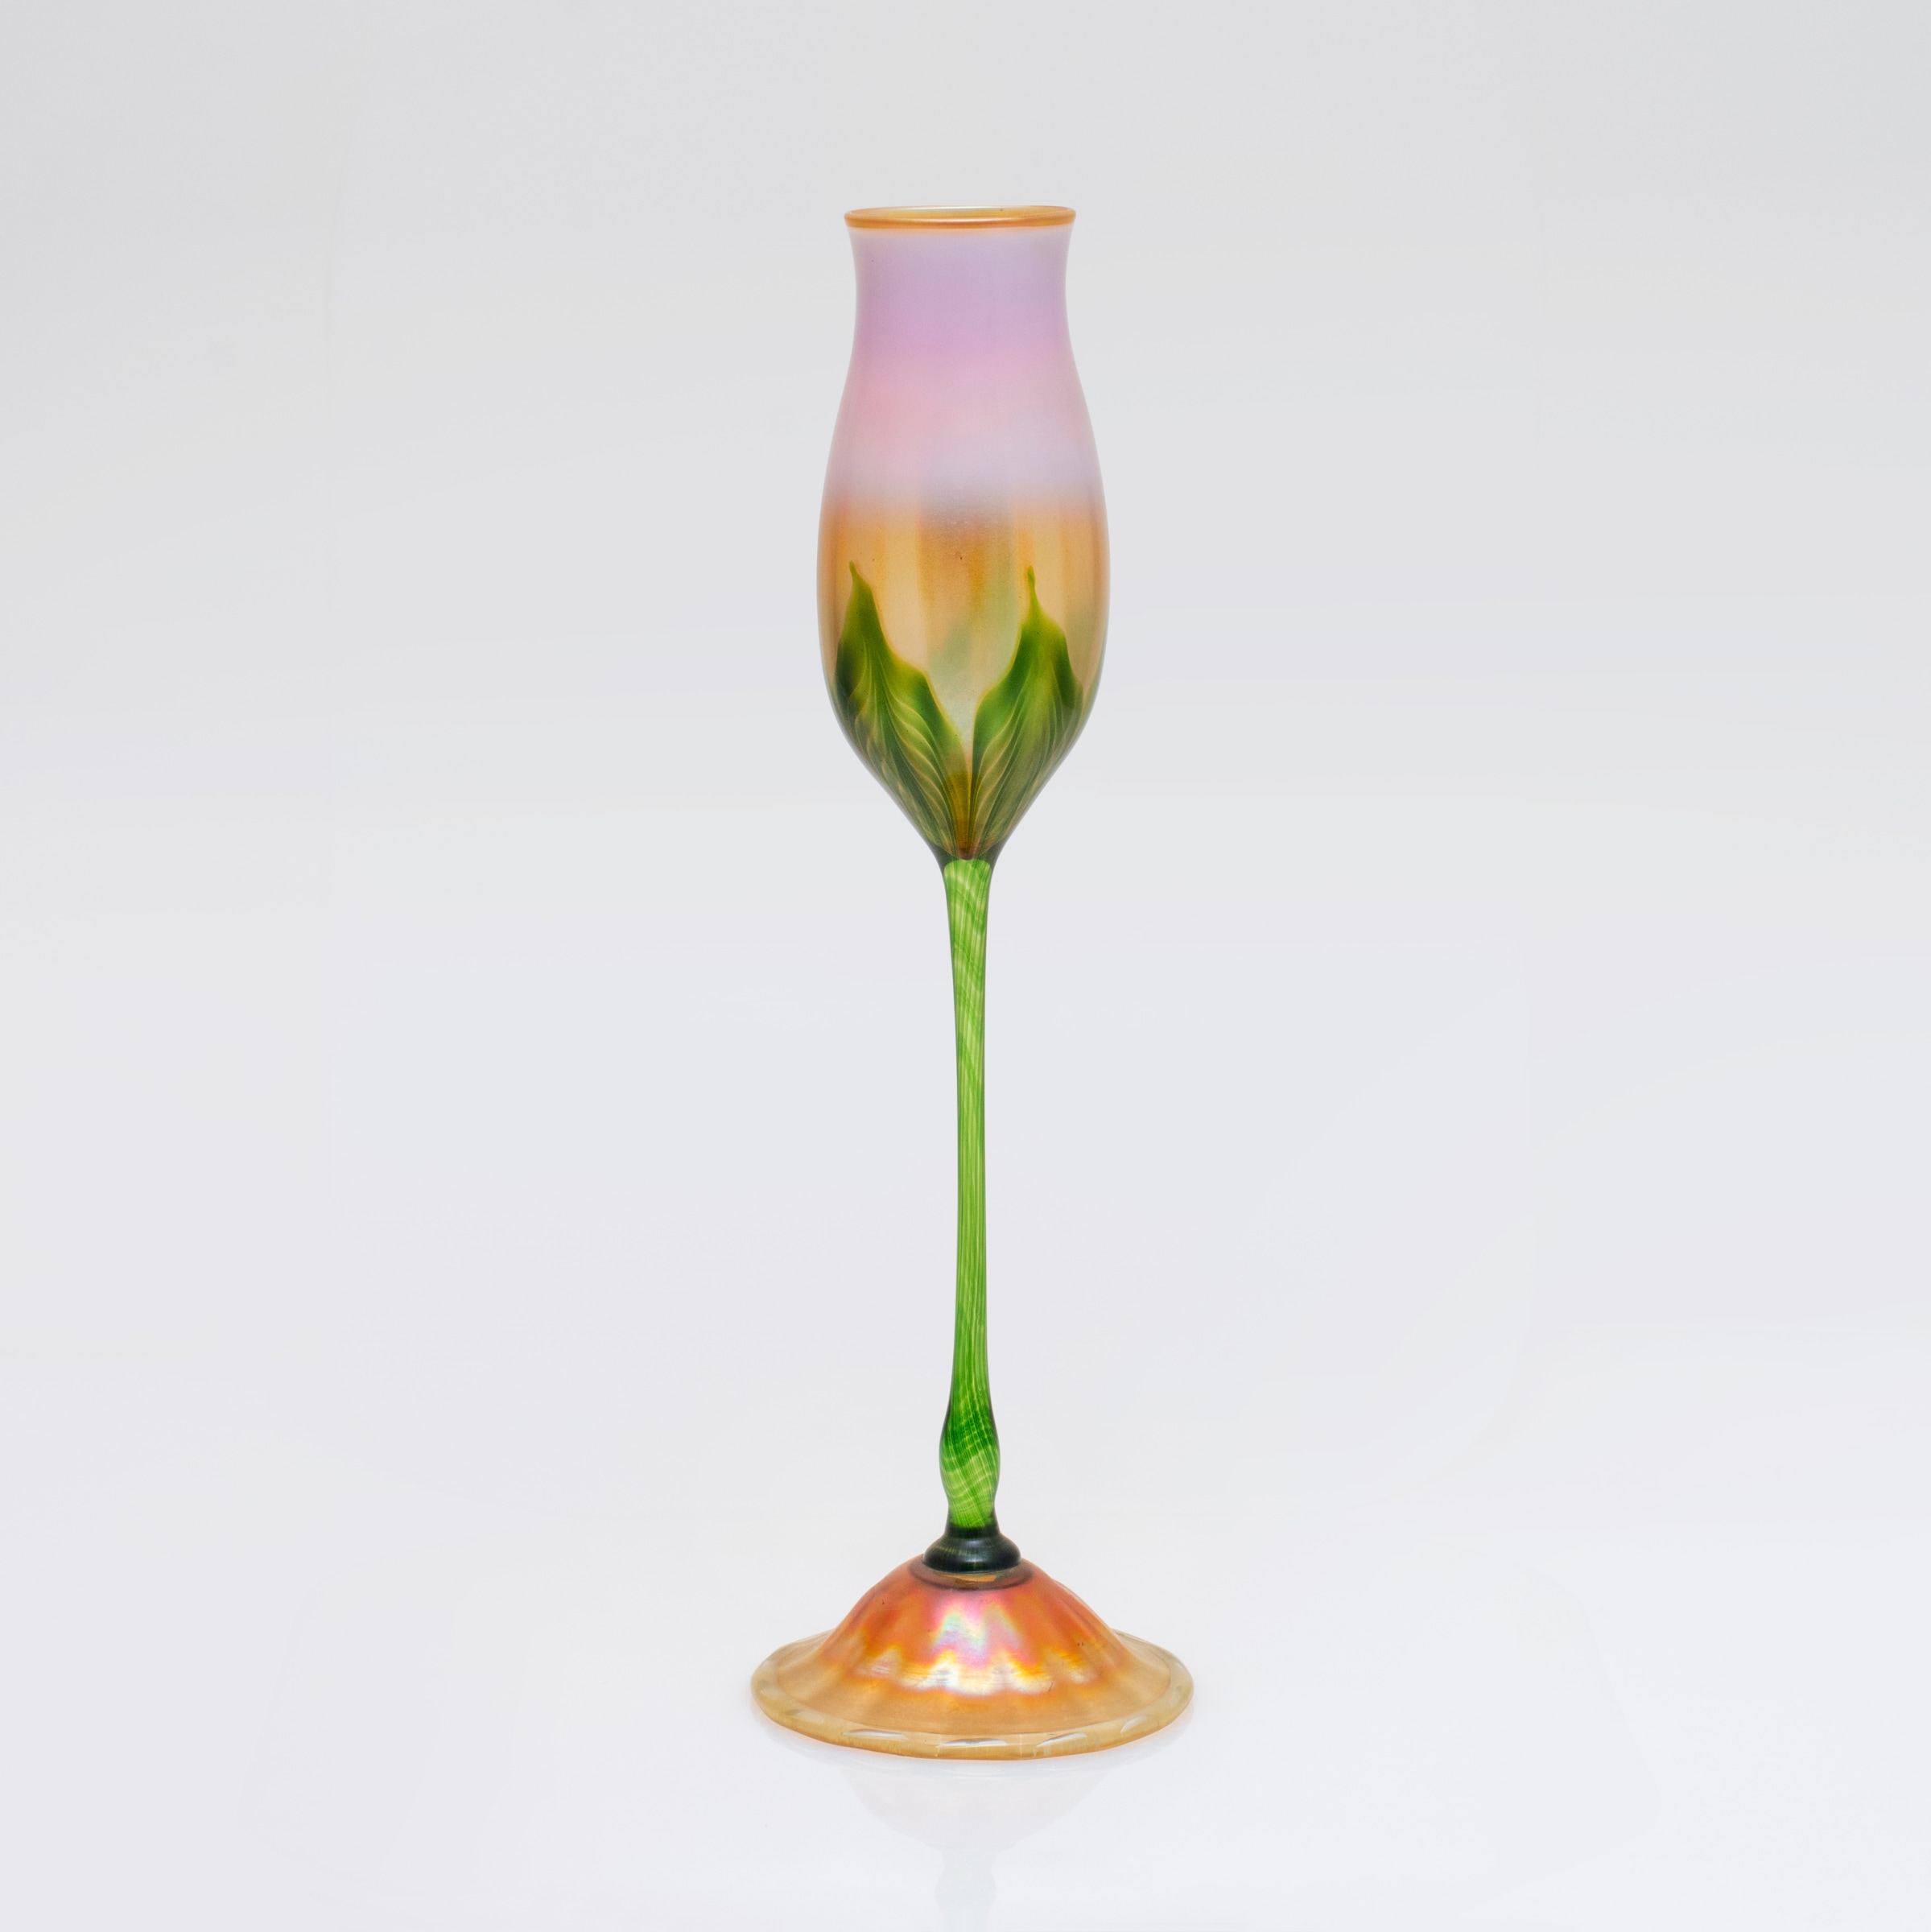 a tiffany favrile glass flower form vase with pinkish flower cup decorated with green stems and gold iridescent foot